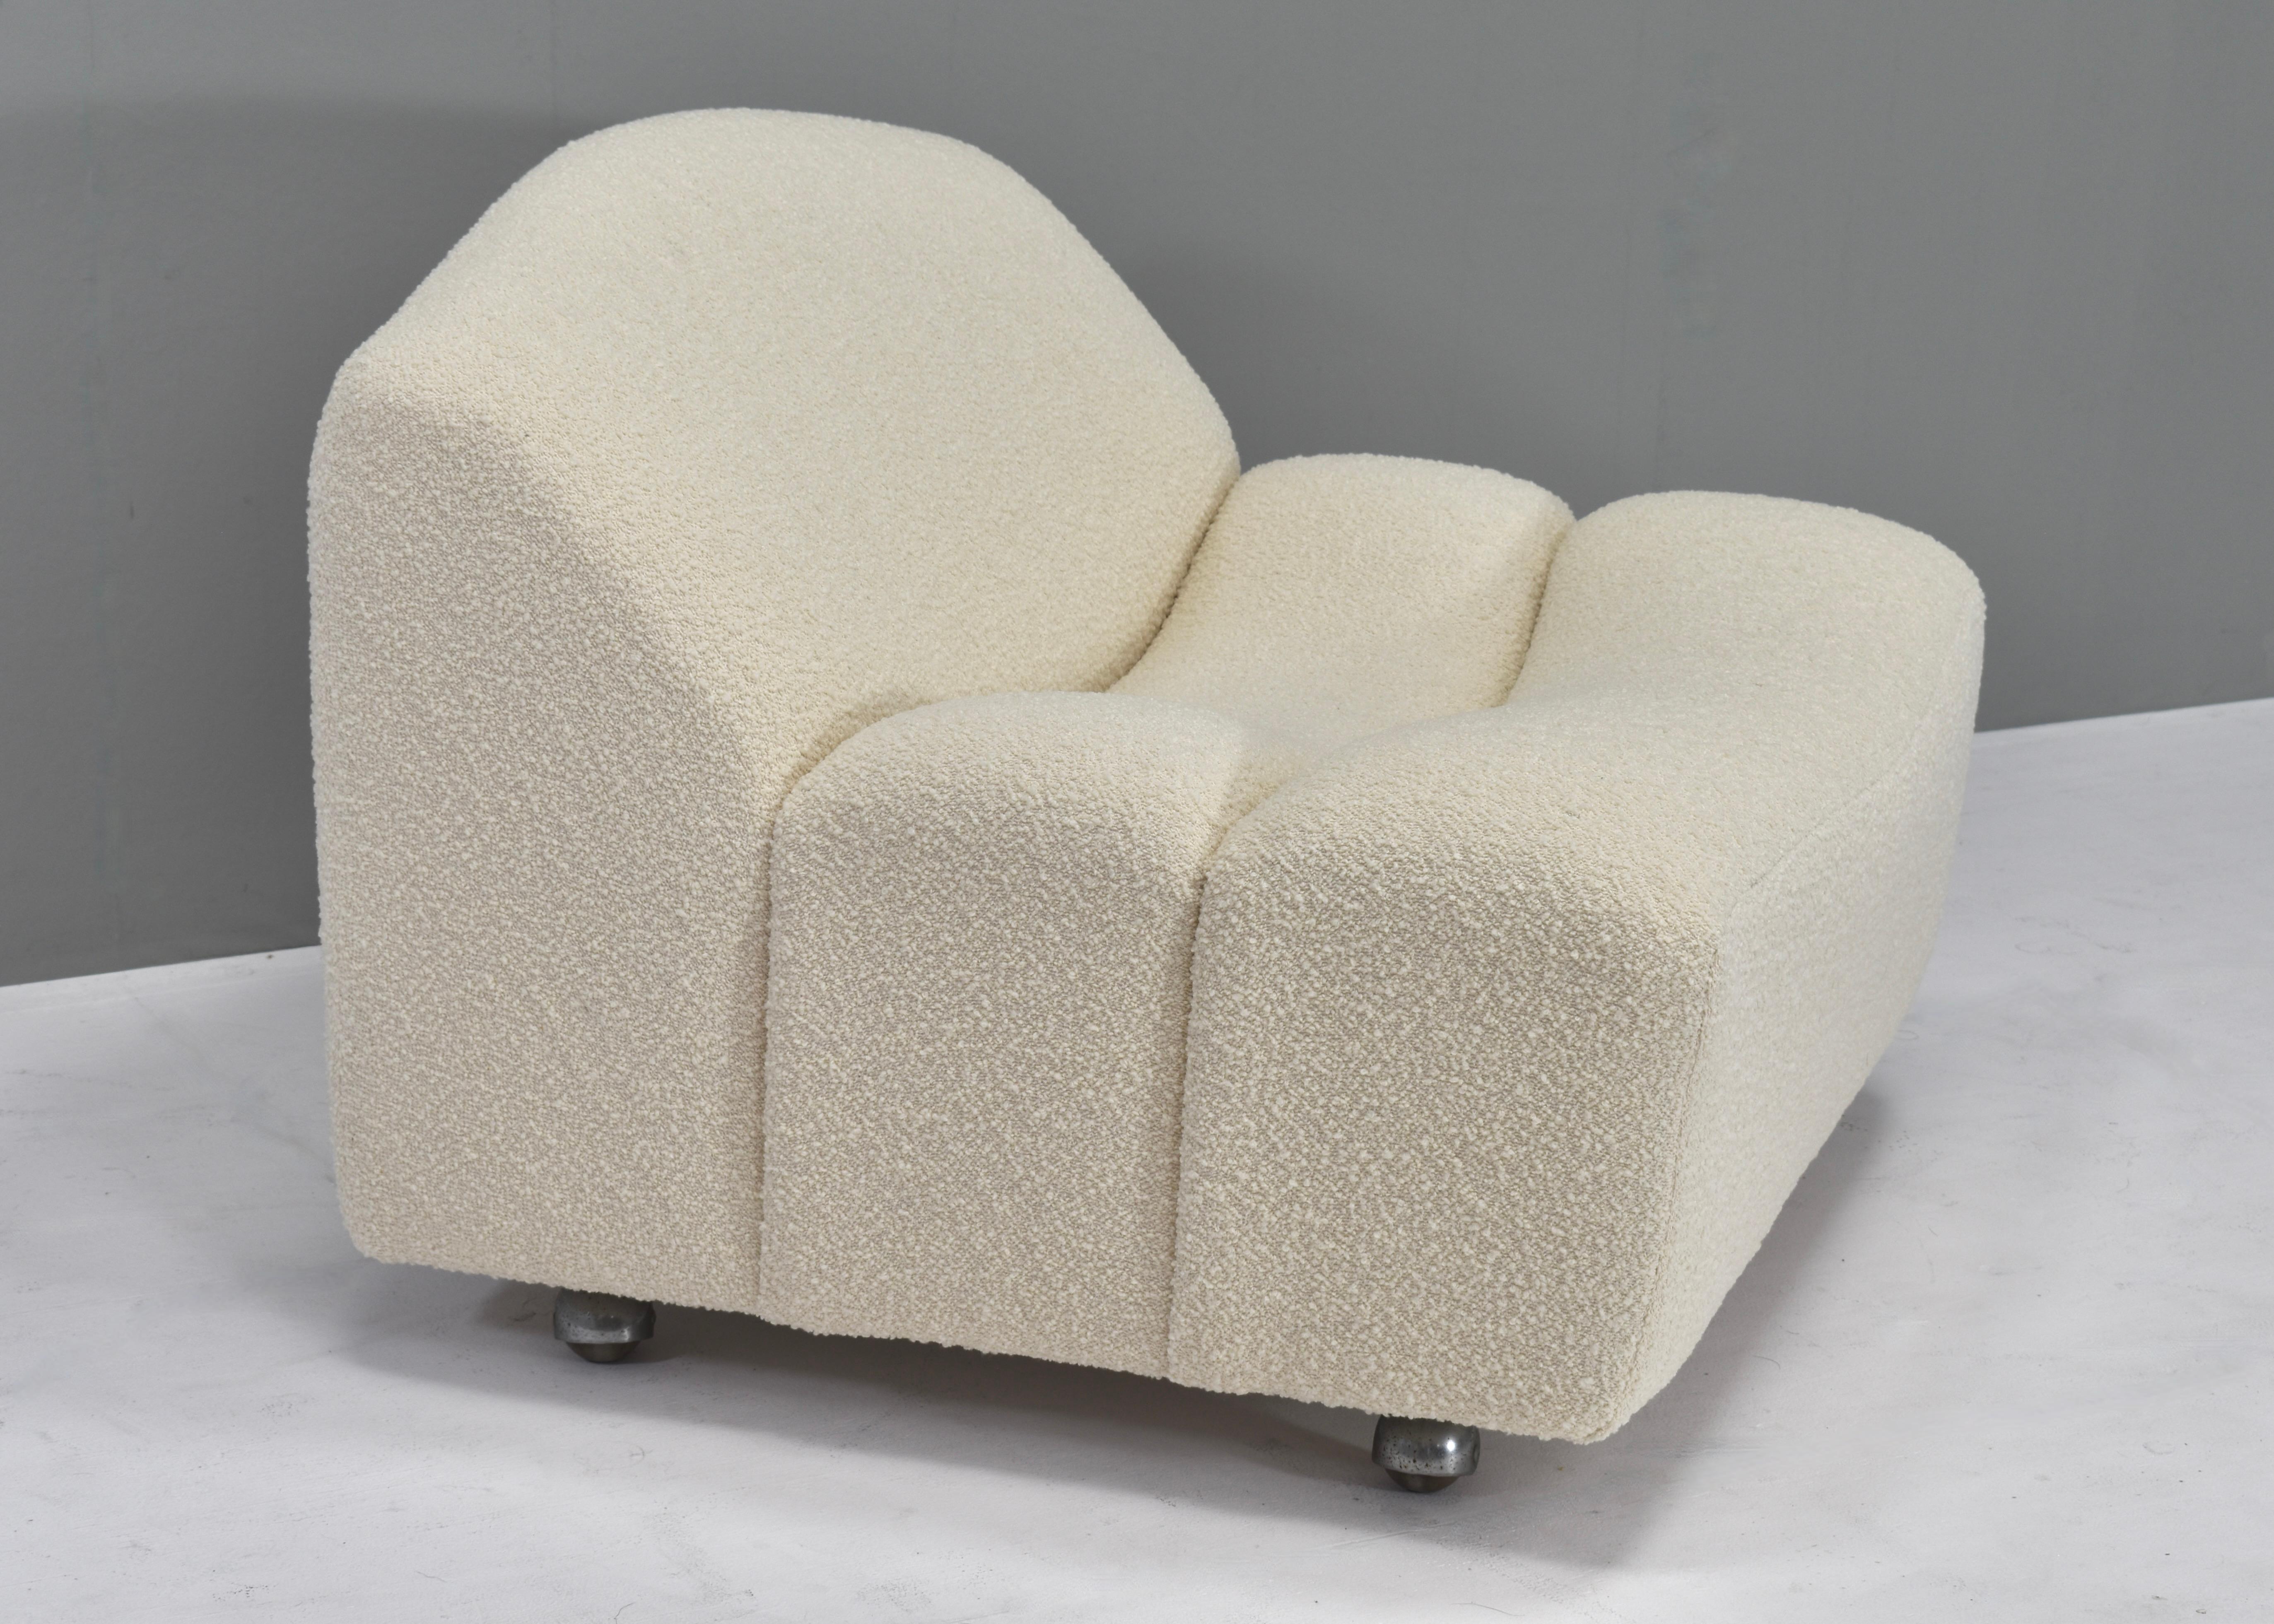 Dutch ABCD Armchair by Pierre Paulin for ARTIFORT New Upholstery, Netherlands - 1968 For Sale